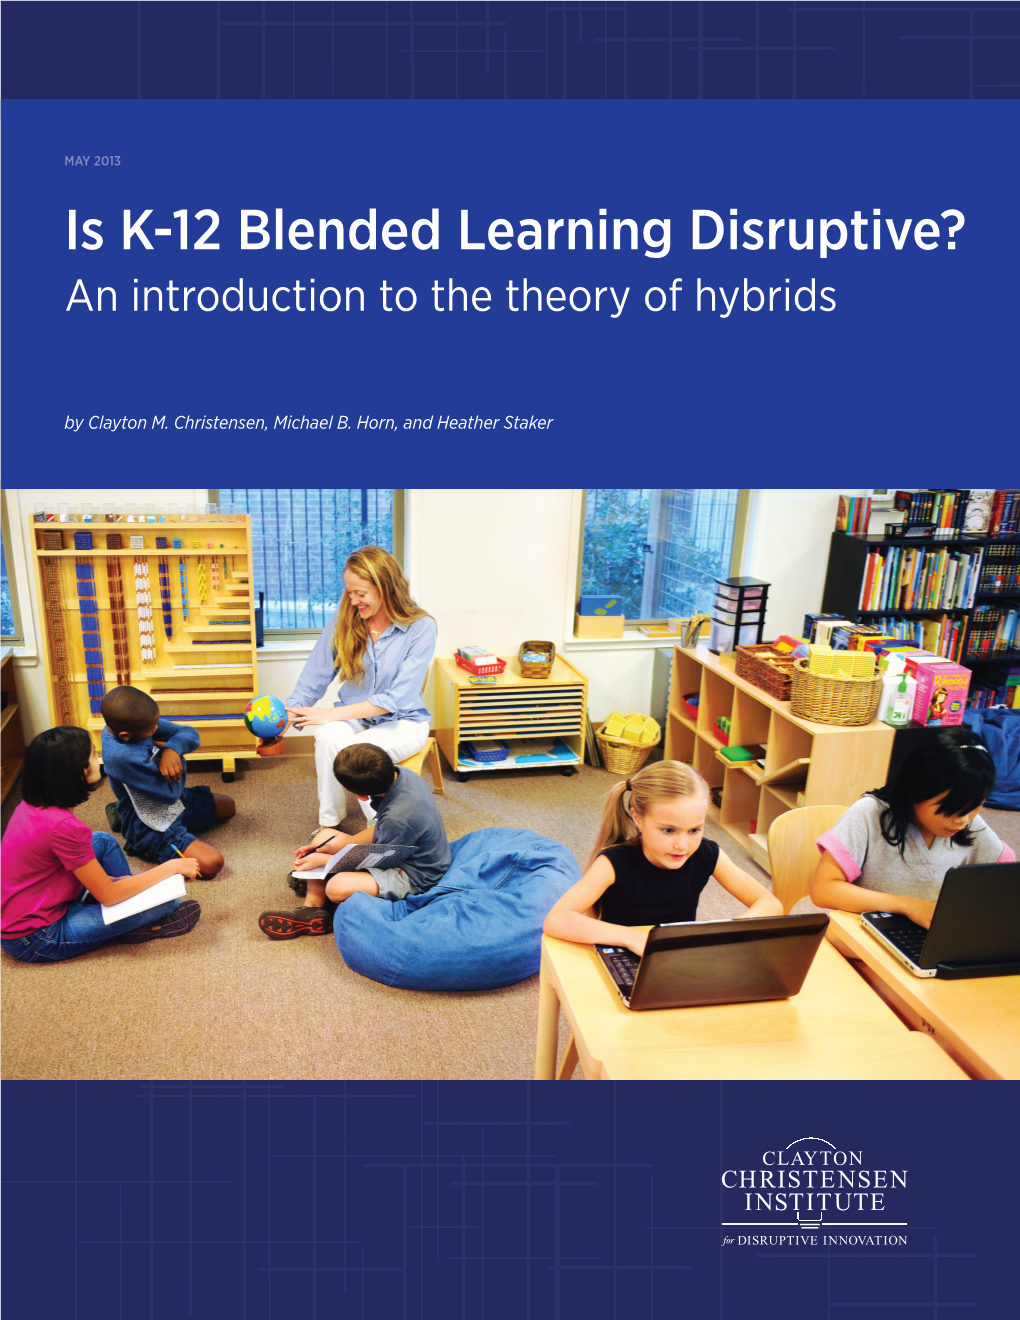 Is K-12 Blended Learning Disruptive? an Introduction to the Theory of Hybrids